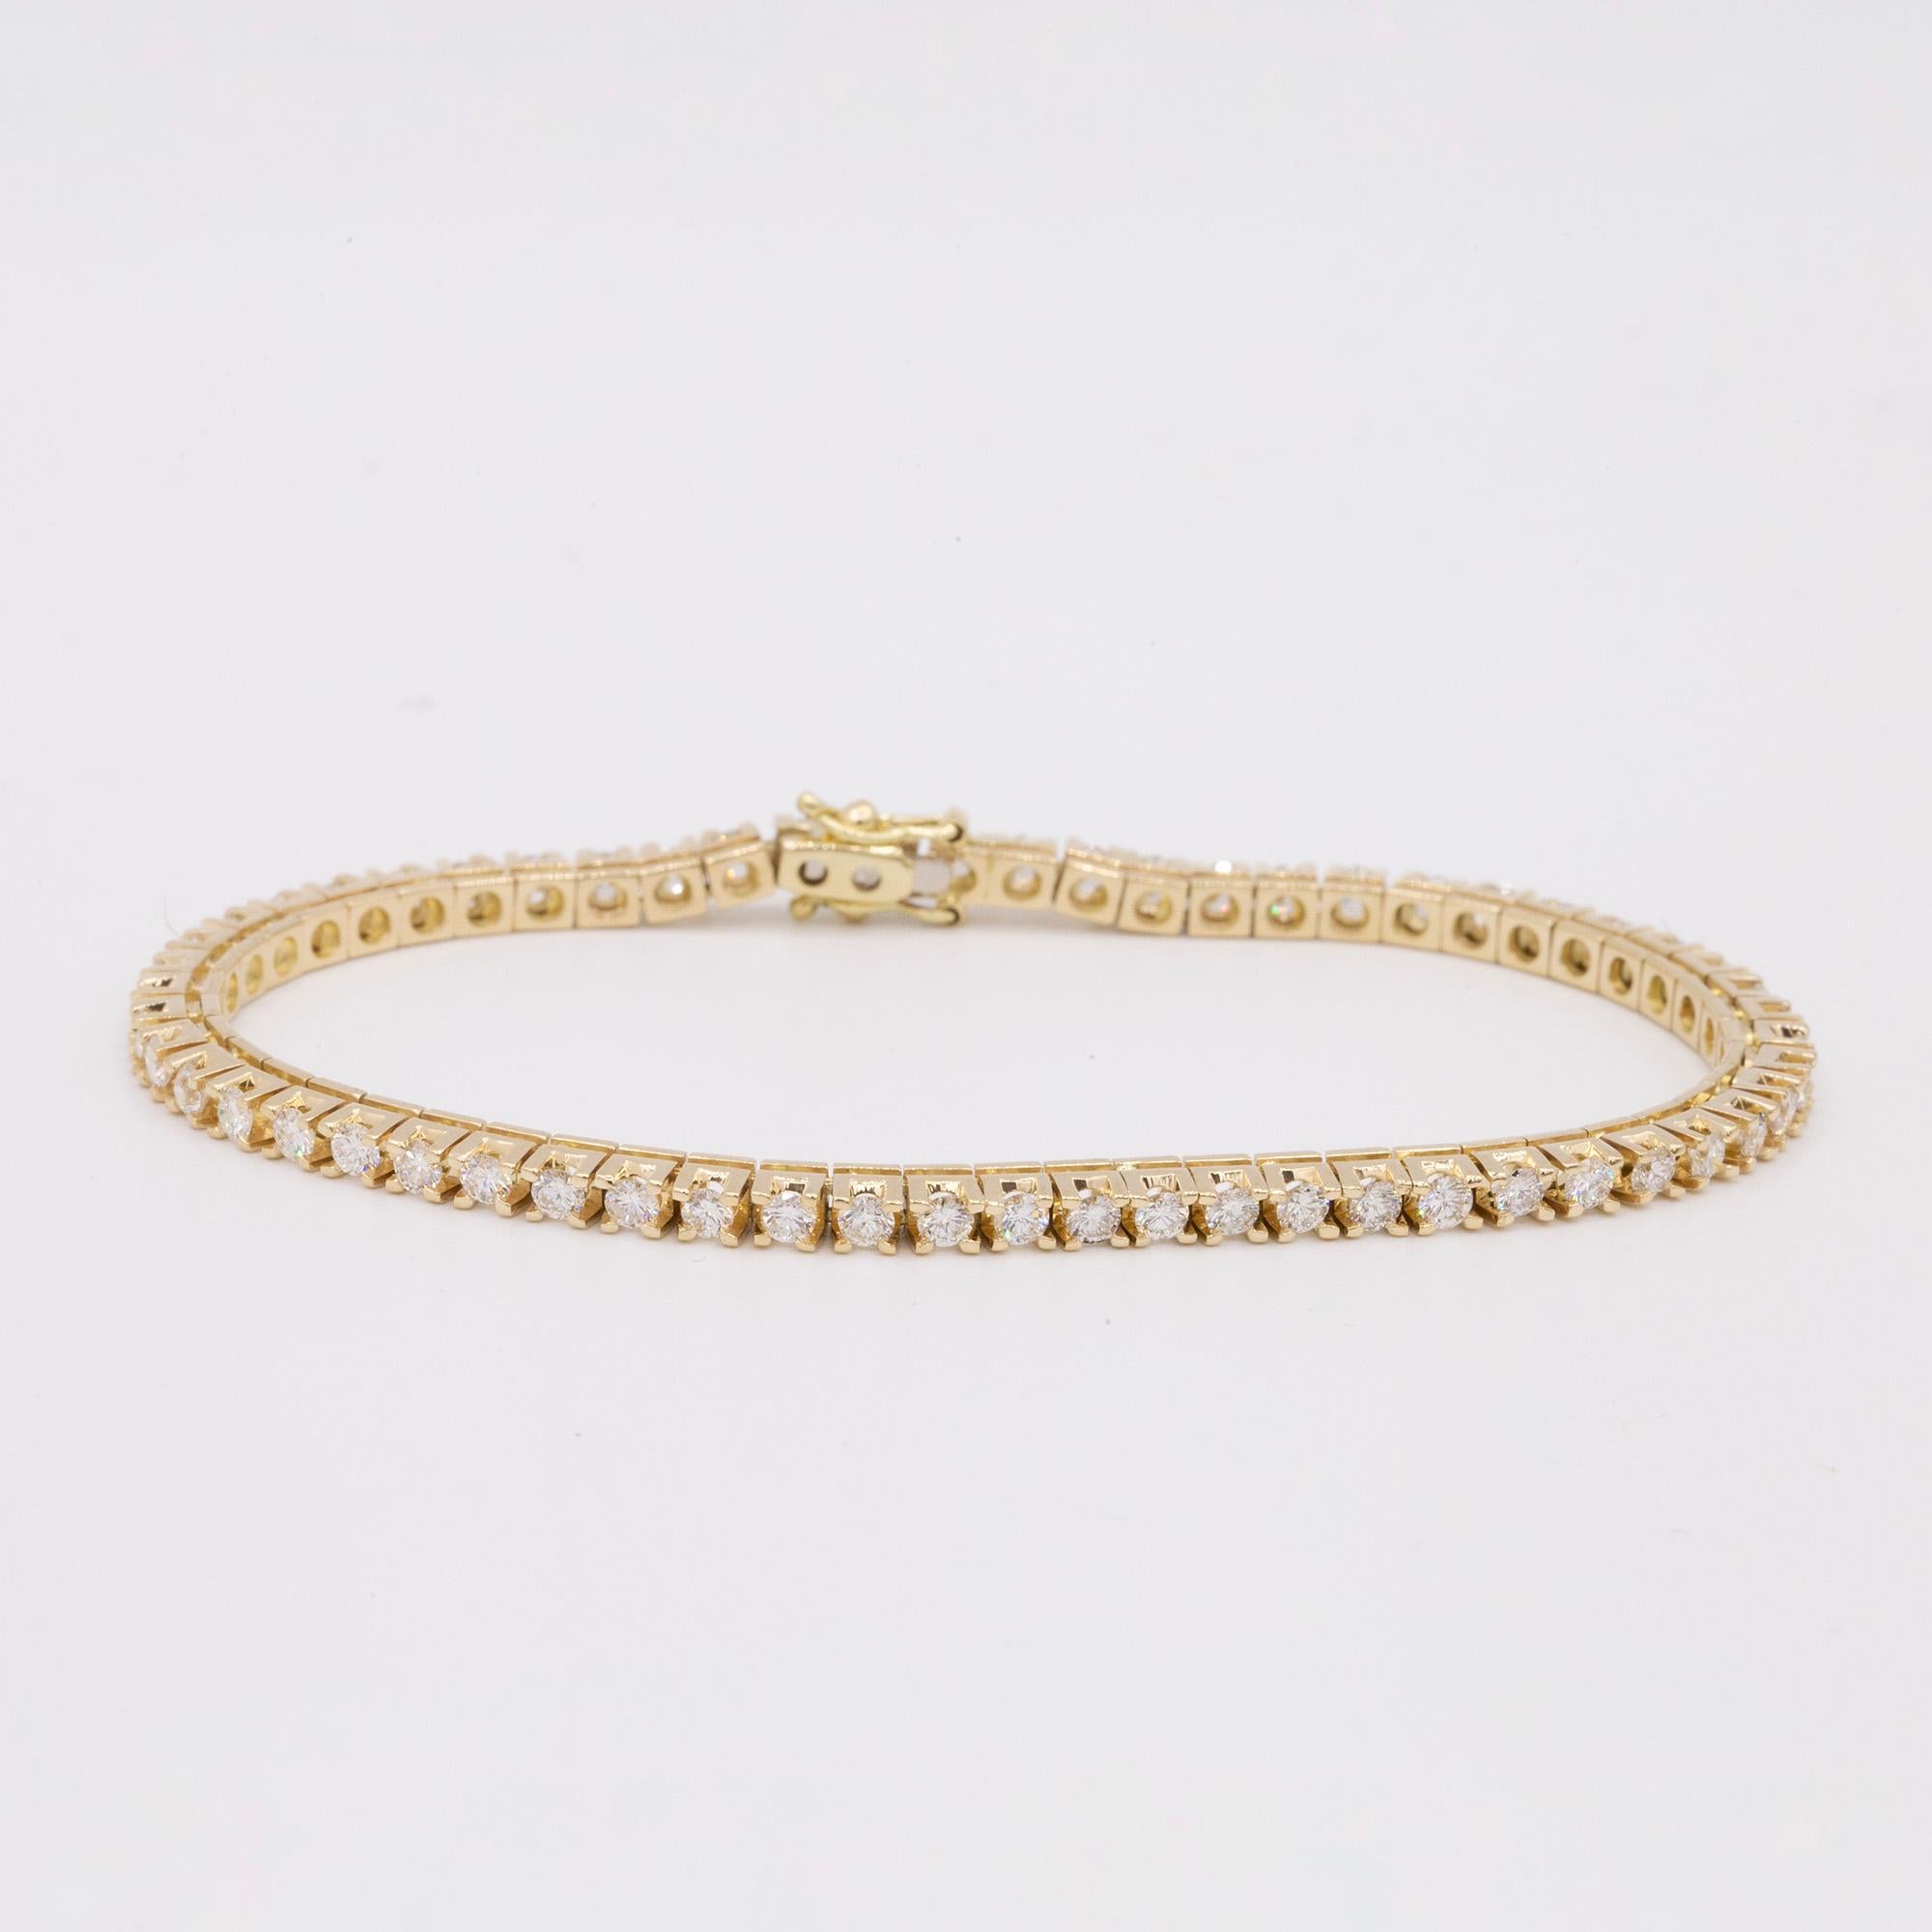 This bracelet was made out of fine 14 karat Yellow Gold and measures 7.25